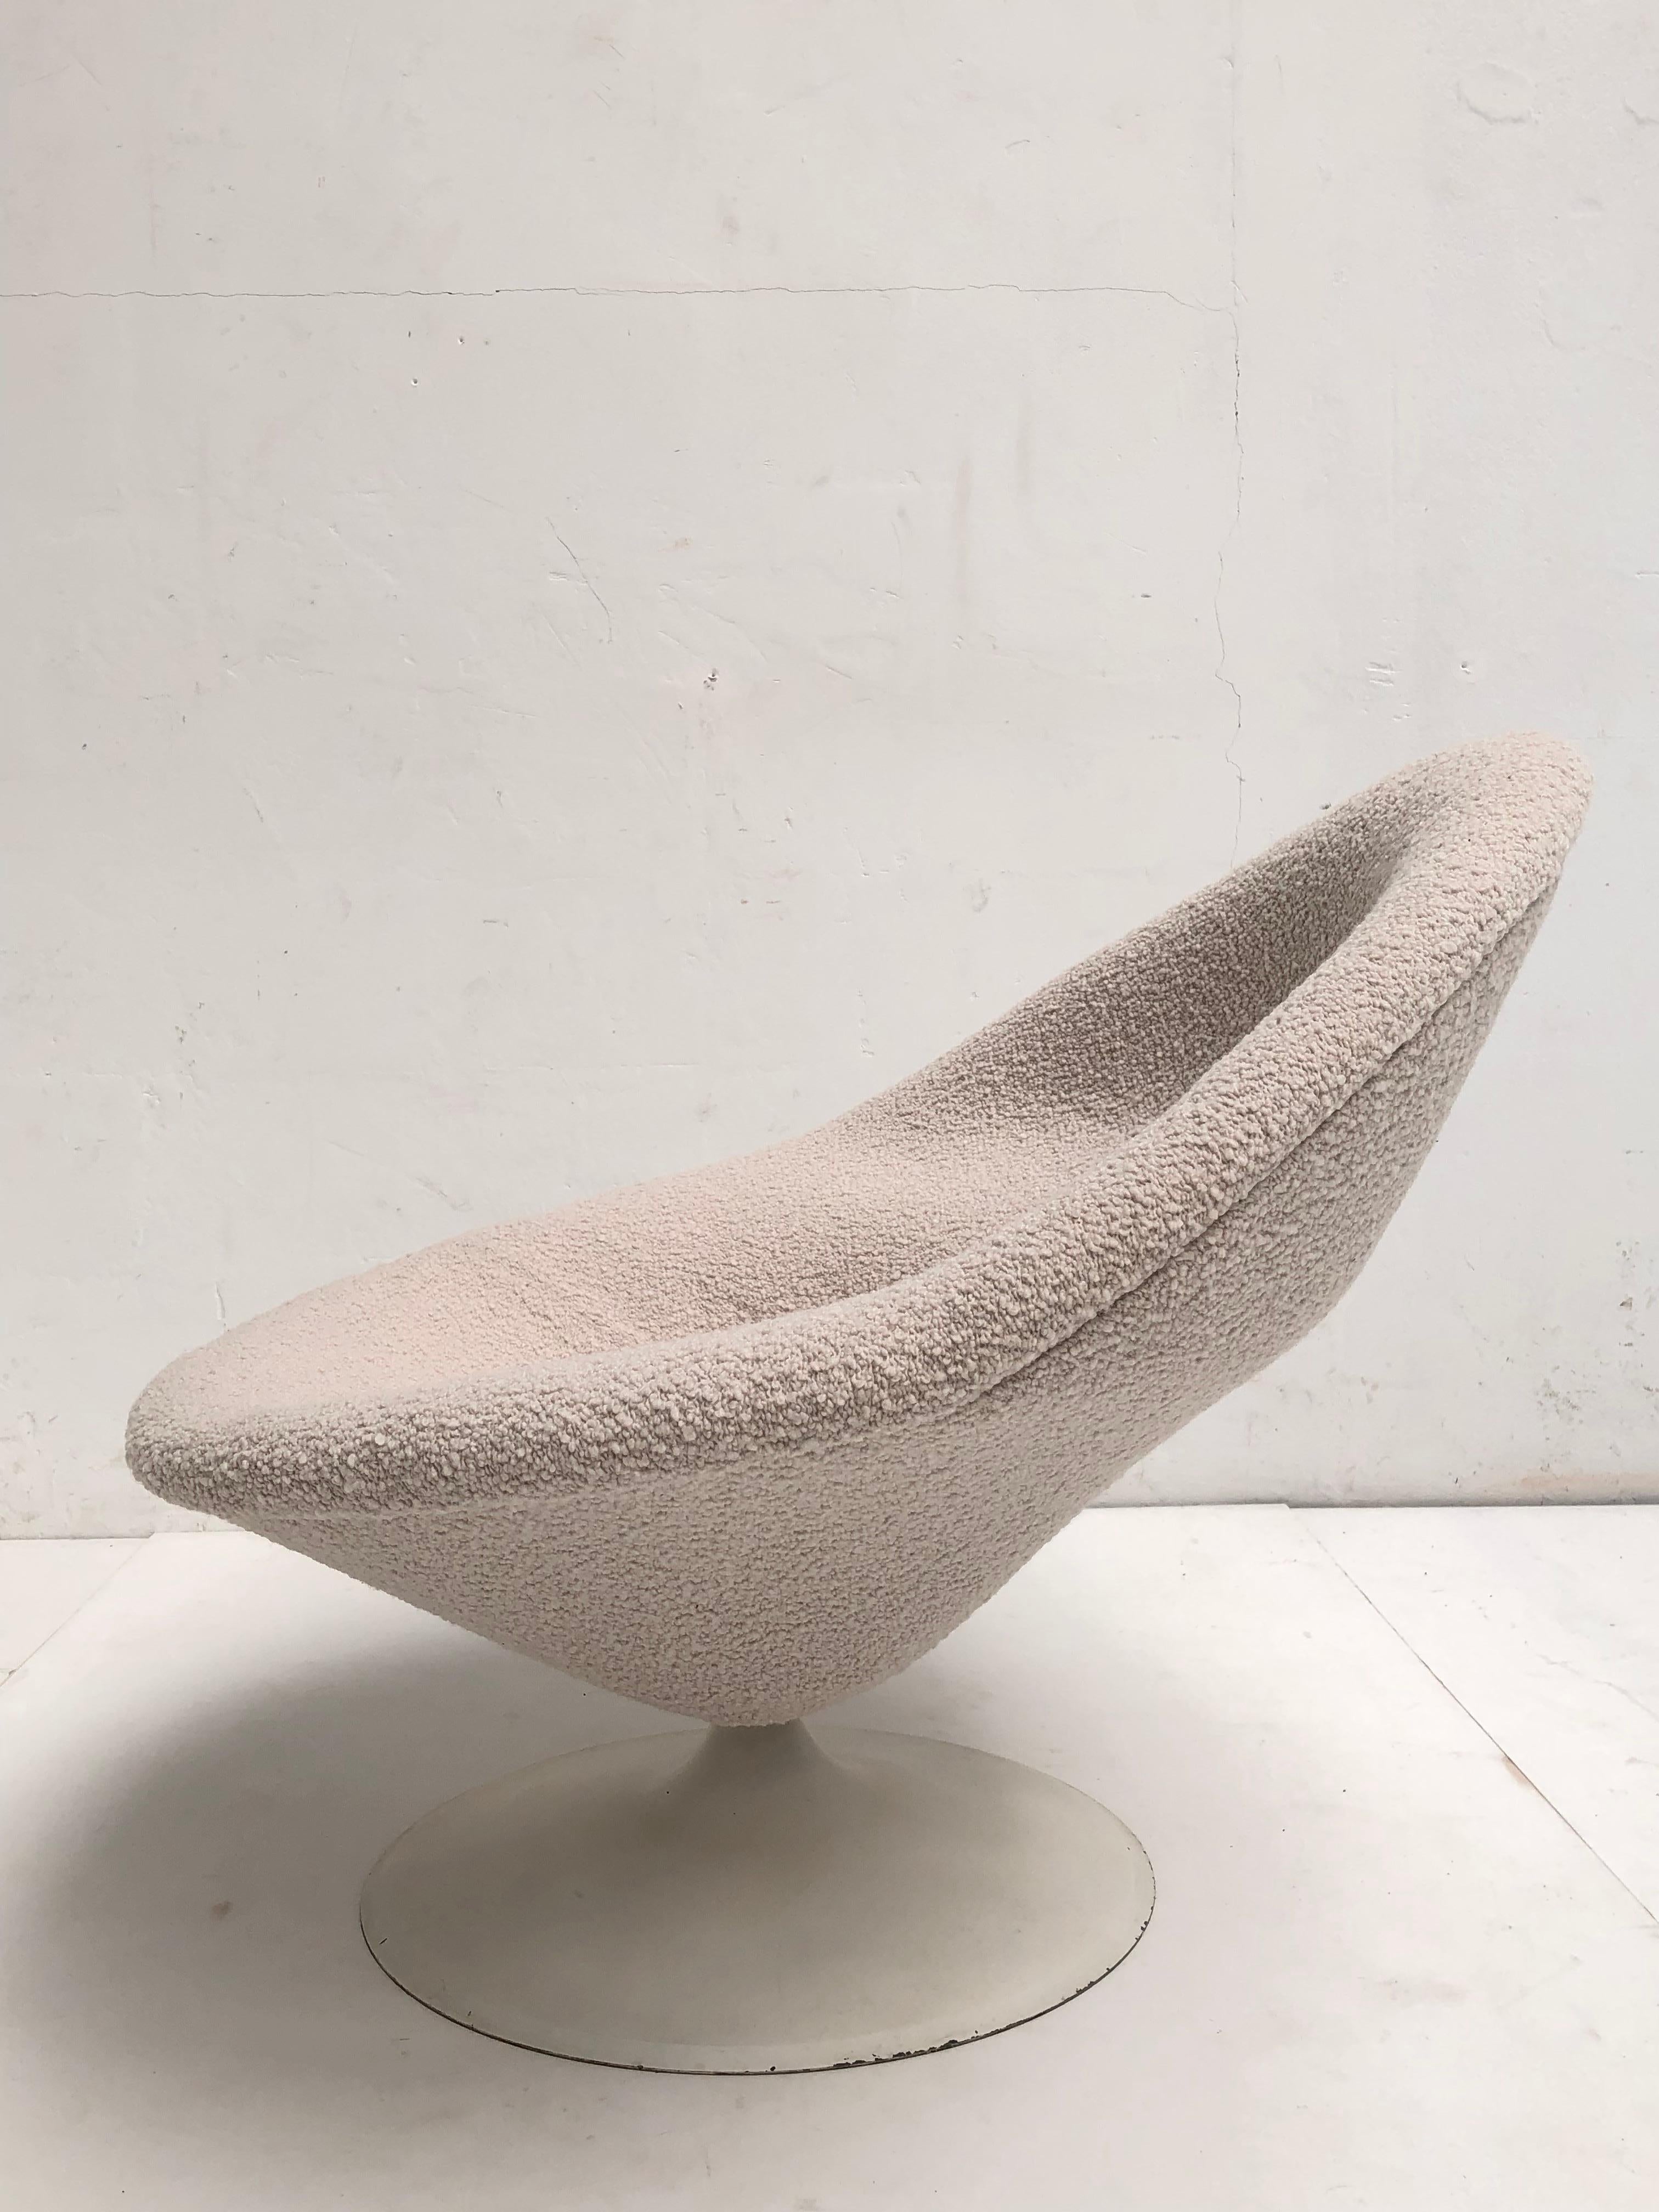 Mid-20th Century Pierre Paulin First Edition Globe Chair F584 Artifort 1960 with New Wool Boucle